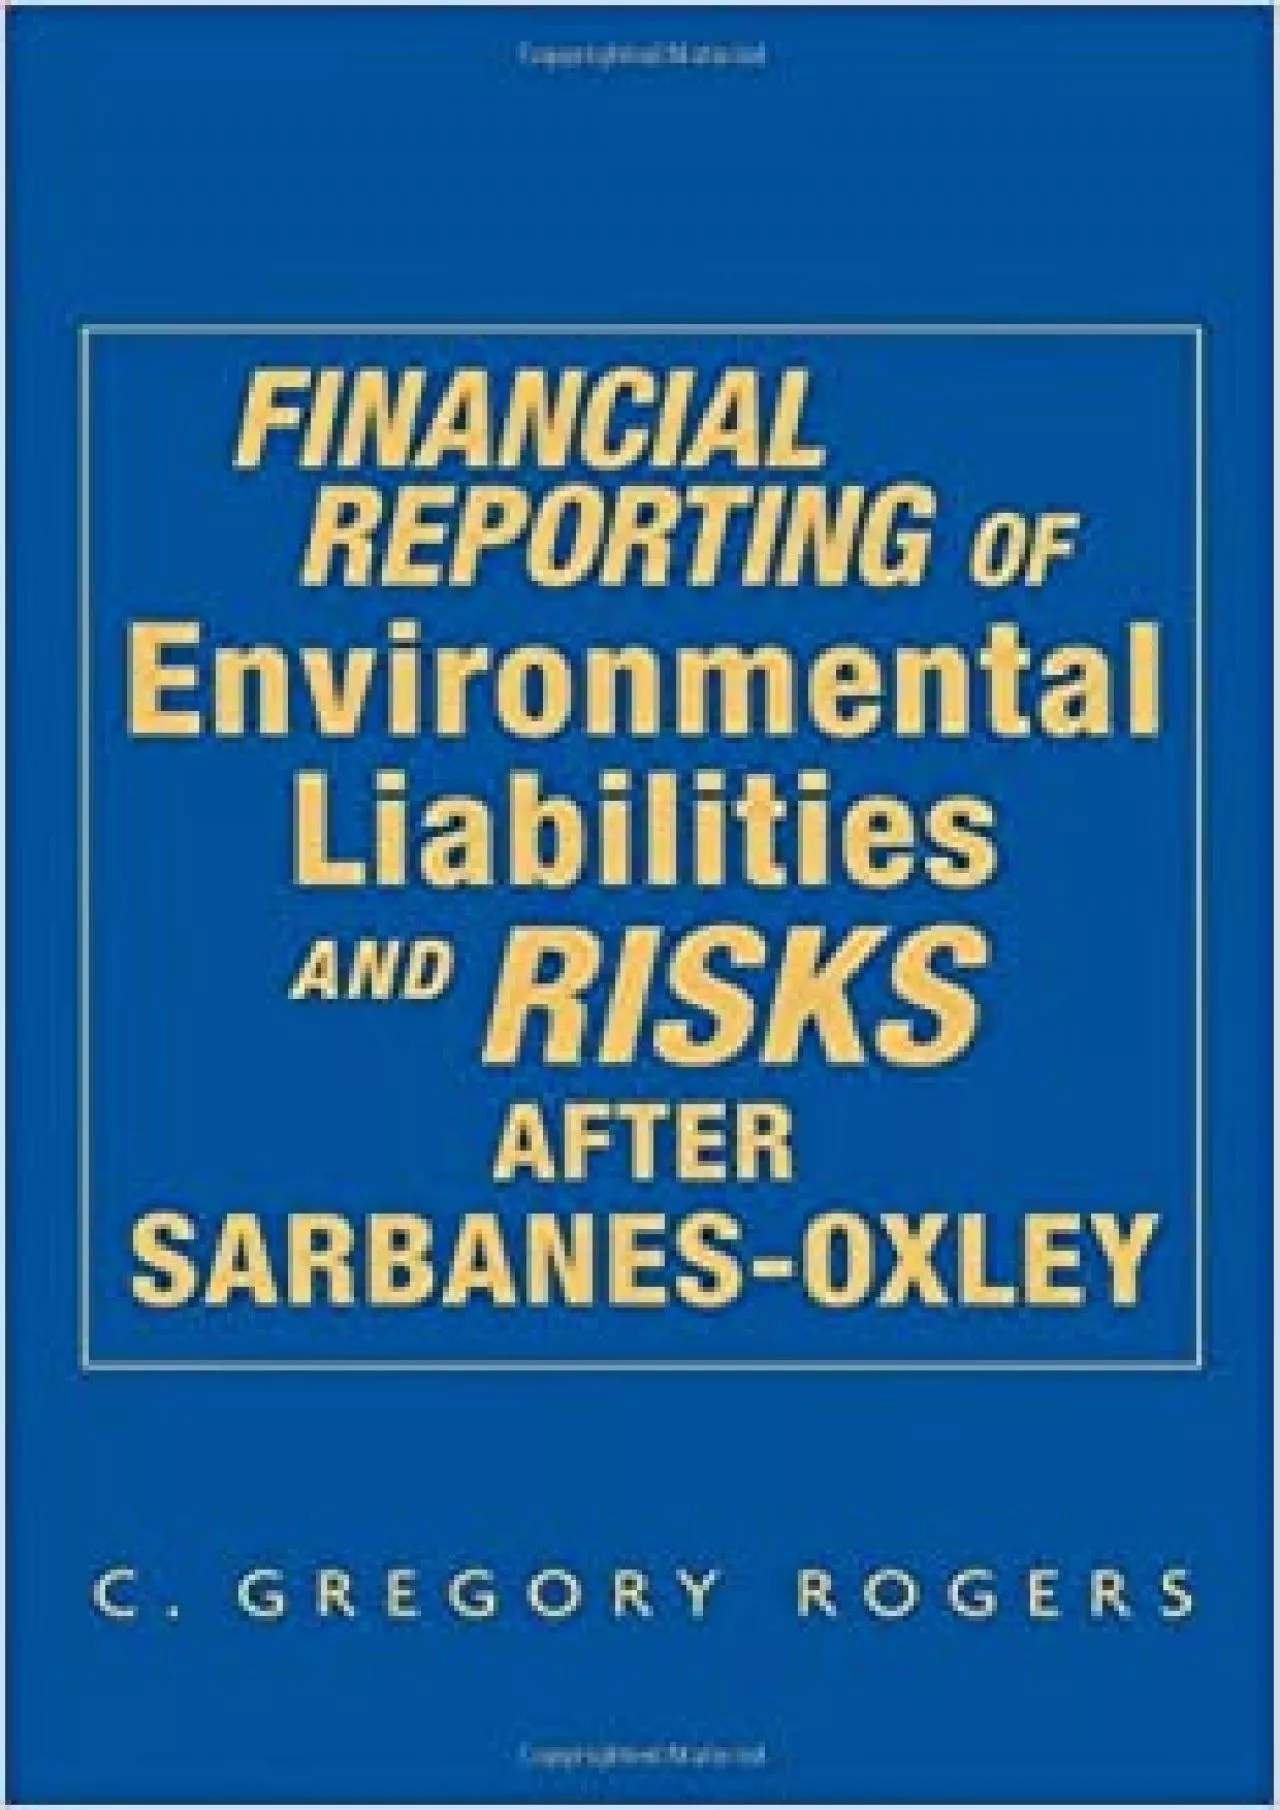 Financial Reporting of Environmental Liabilities and Risks after Sarbanes-Oxley